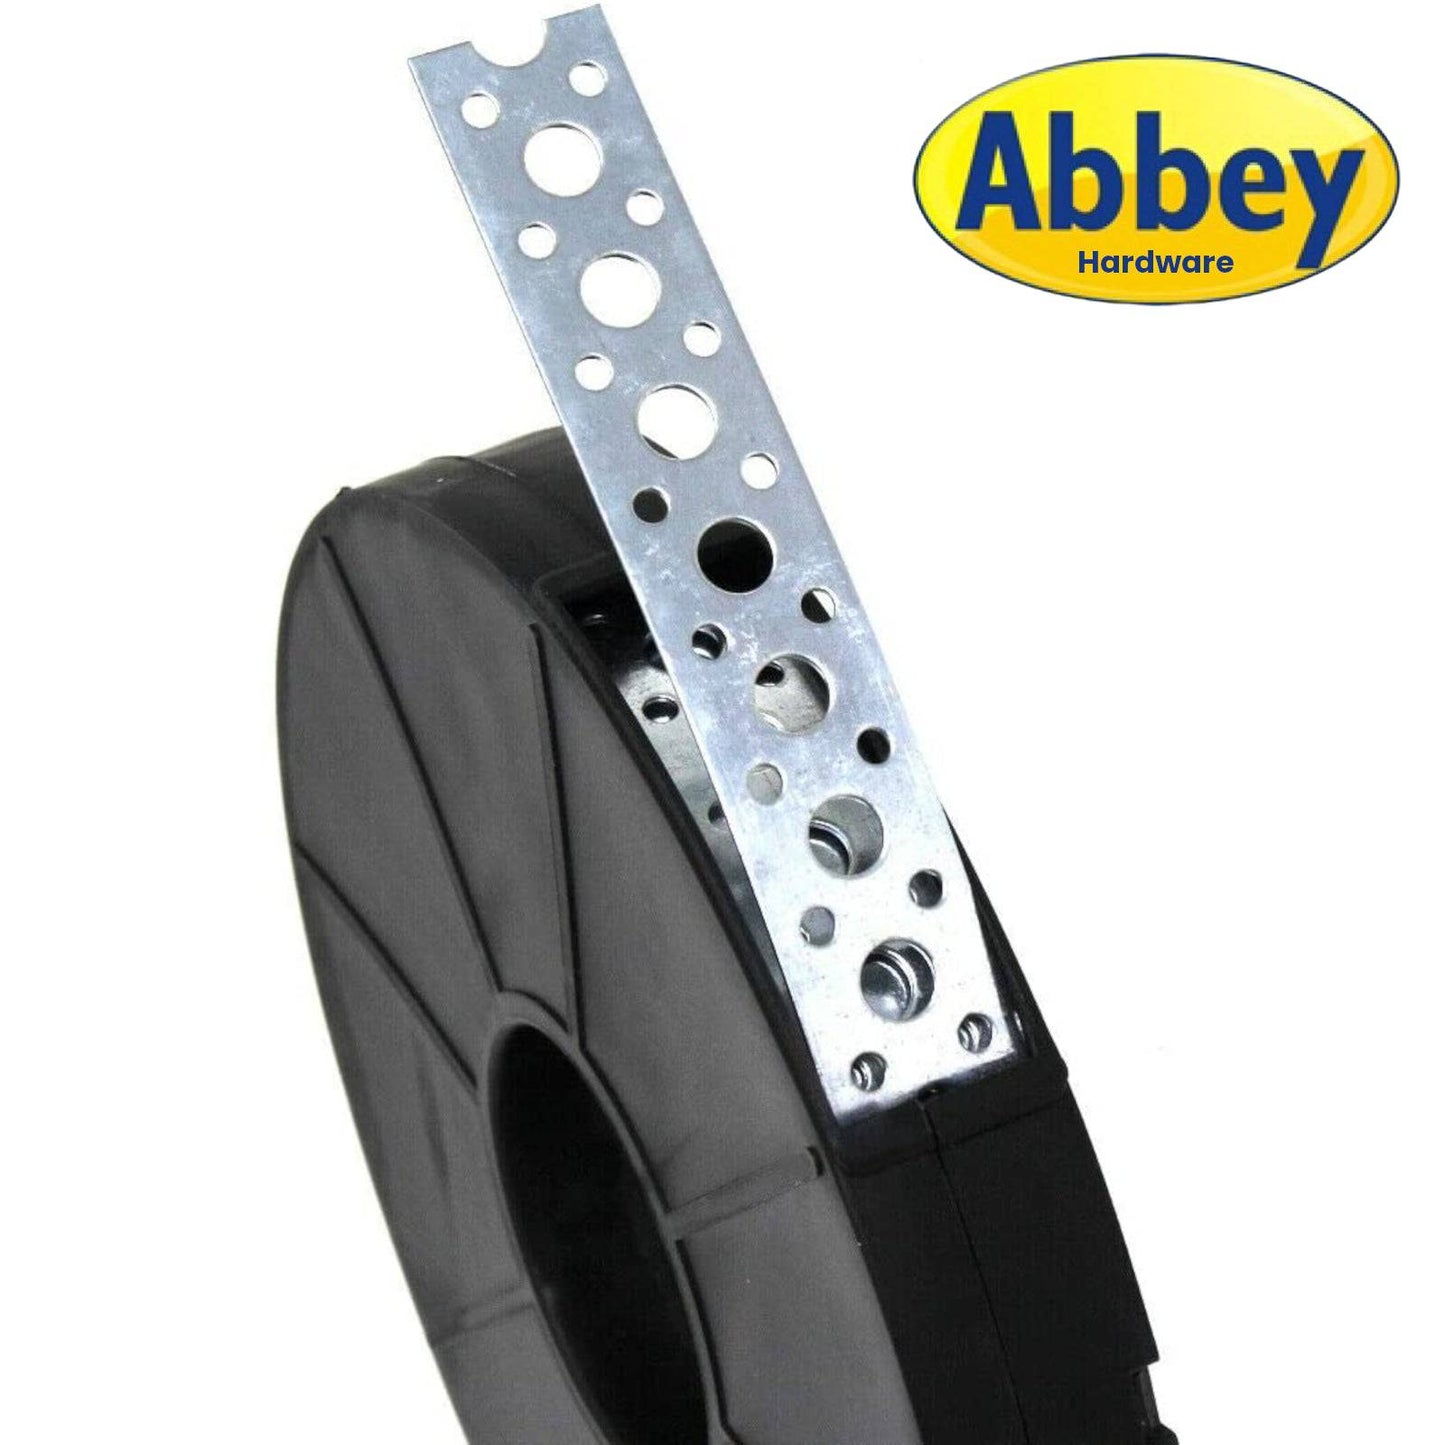 Abbey Hardware 10 Metres of 18mm Heavy Duty Builder's Fixing Band - Abbey Hardware